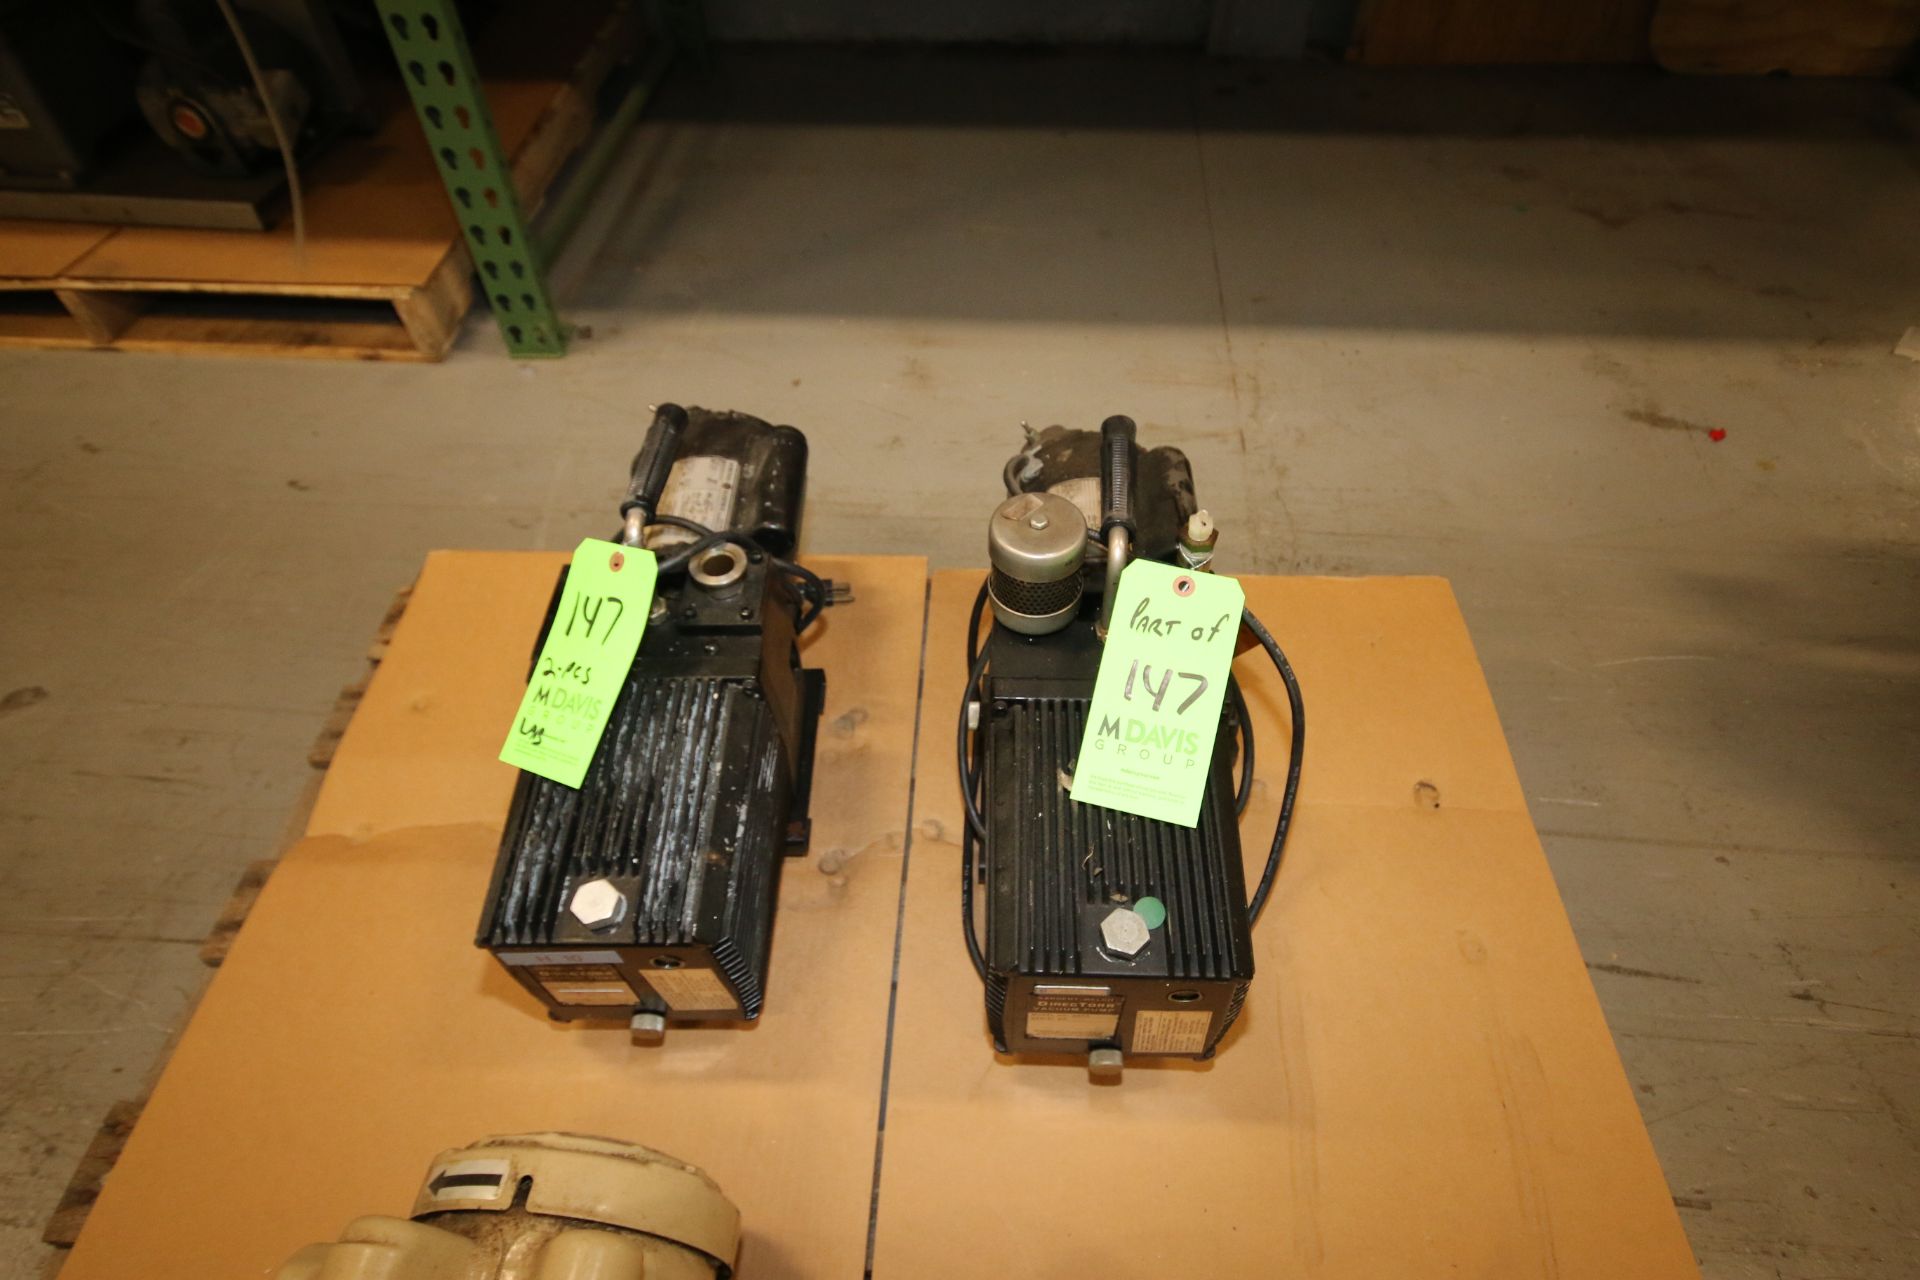 Sargent Welch Direct Torr Vacuum Pumps, Model 8811, S/N 2830 and Model 8806, S/N 2684